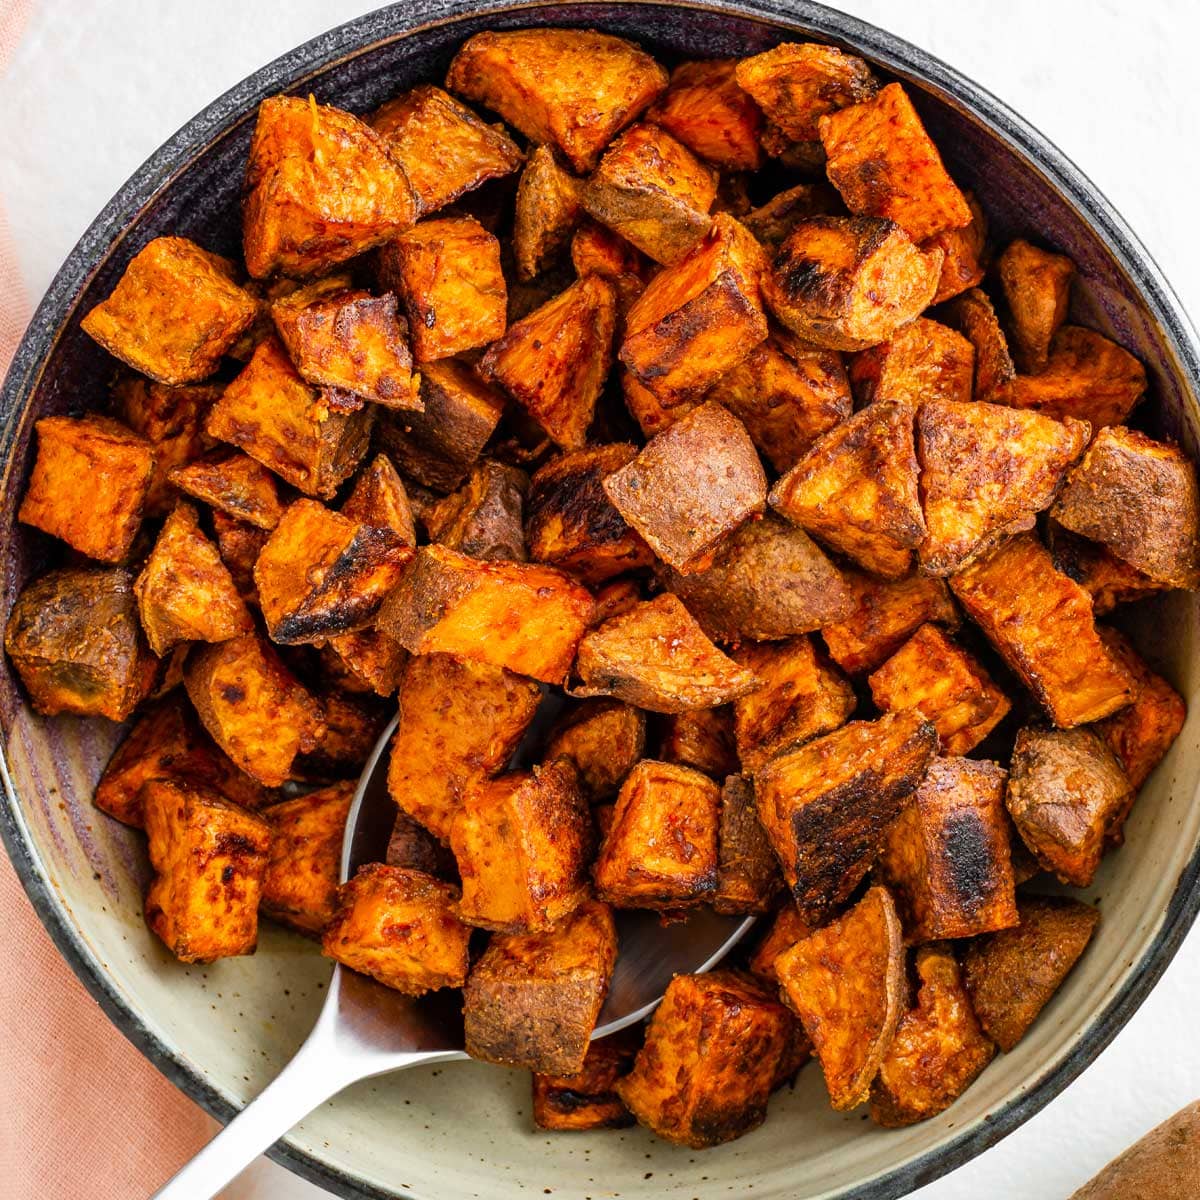 Crispy and Cubed Roasted Sweet Potatoes